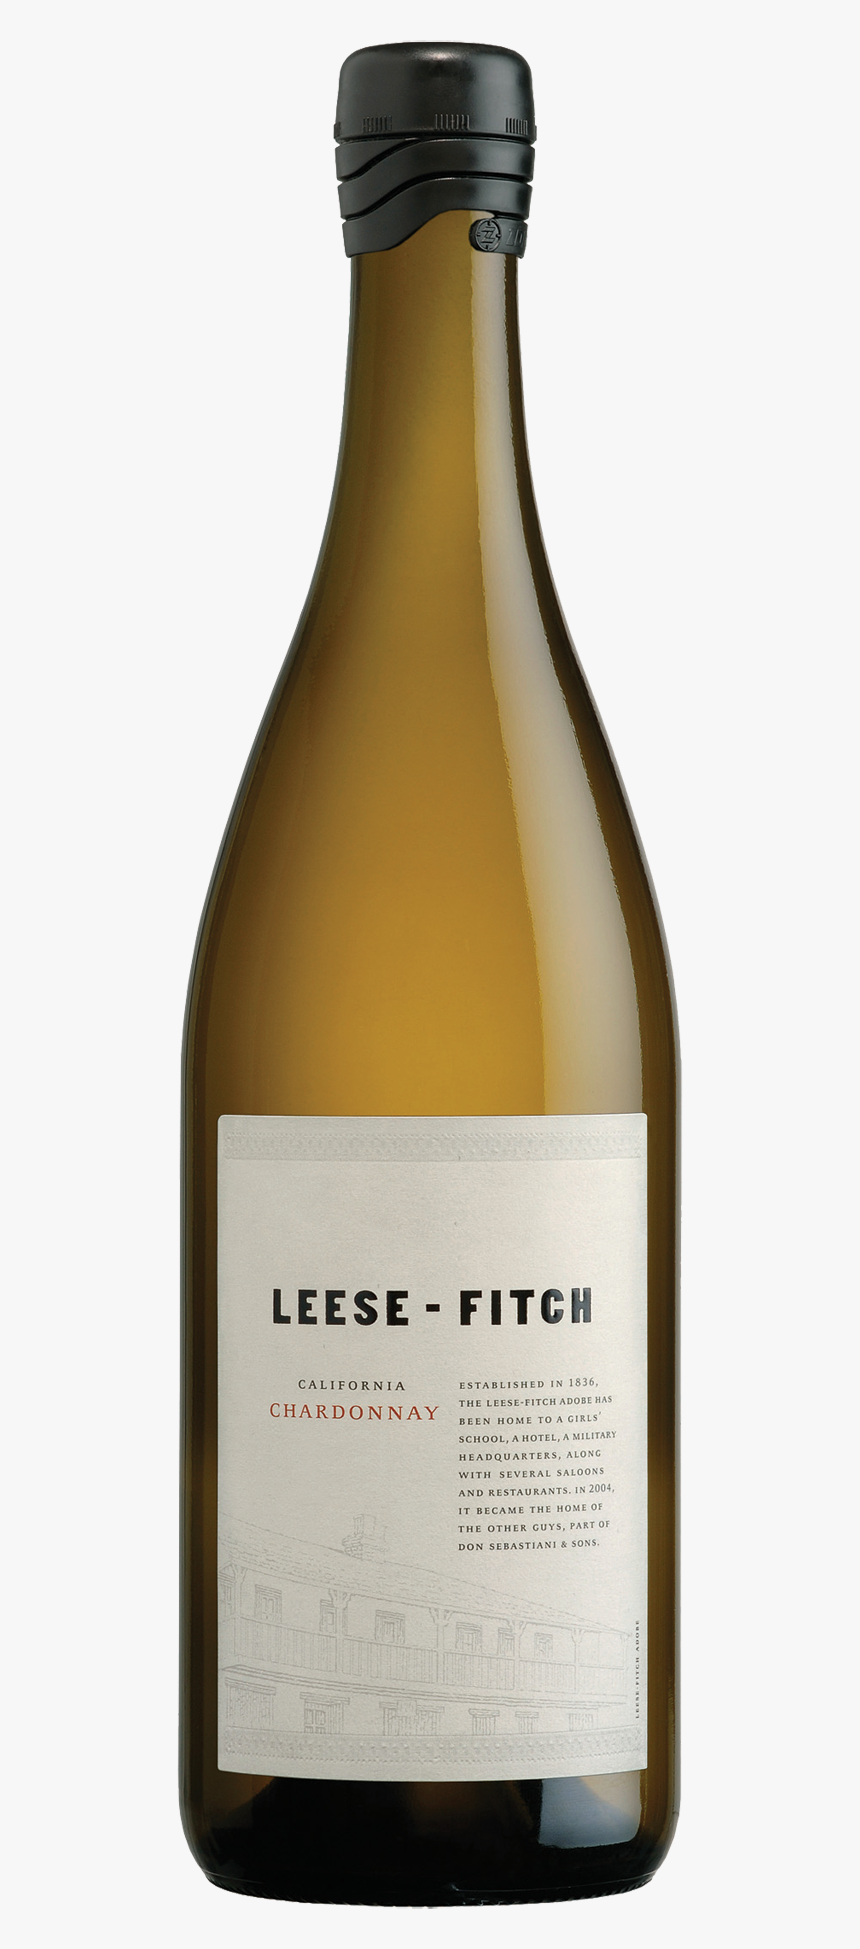 Bottle Png Image, Free Download Image Of Bottle - Leese Fitch Pinot Noir 2016, Transparent Png, Free Download